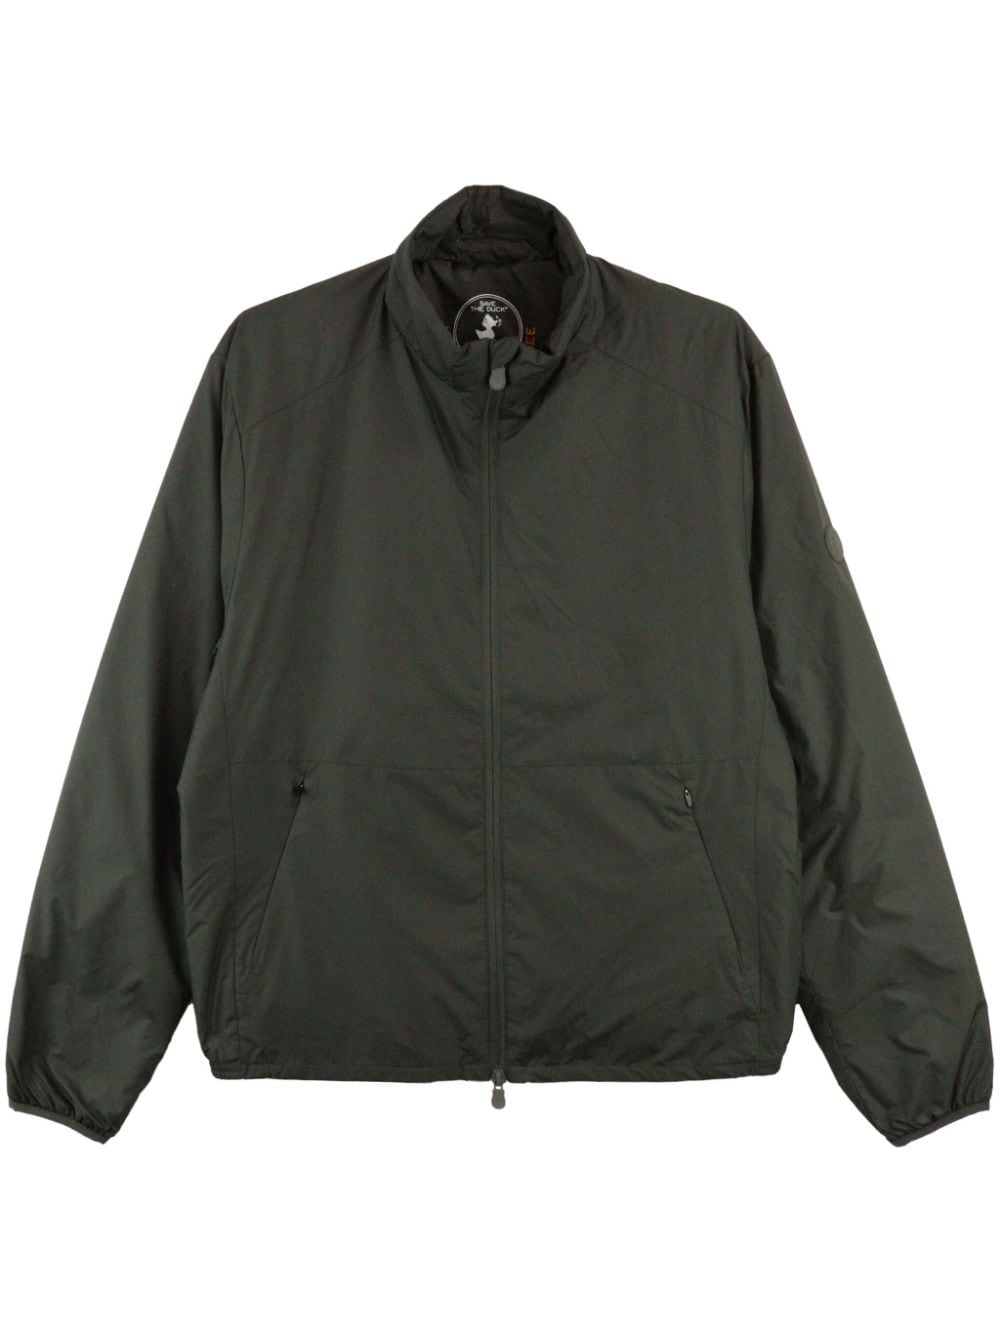 Image 1 of Save The Duck mock-neck bomber jacket